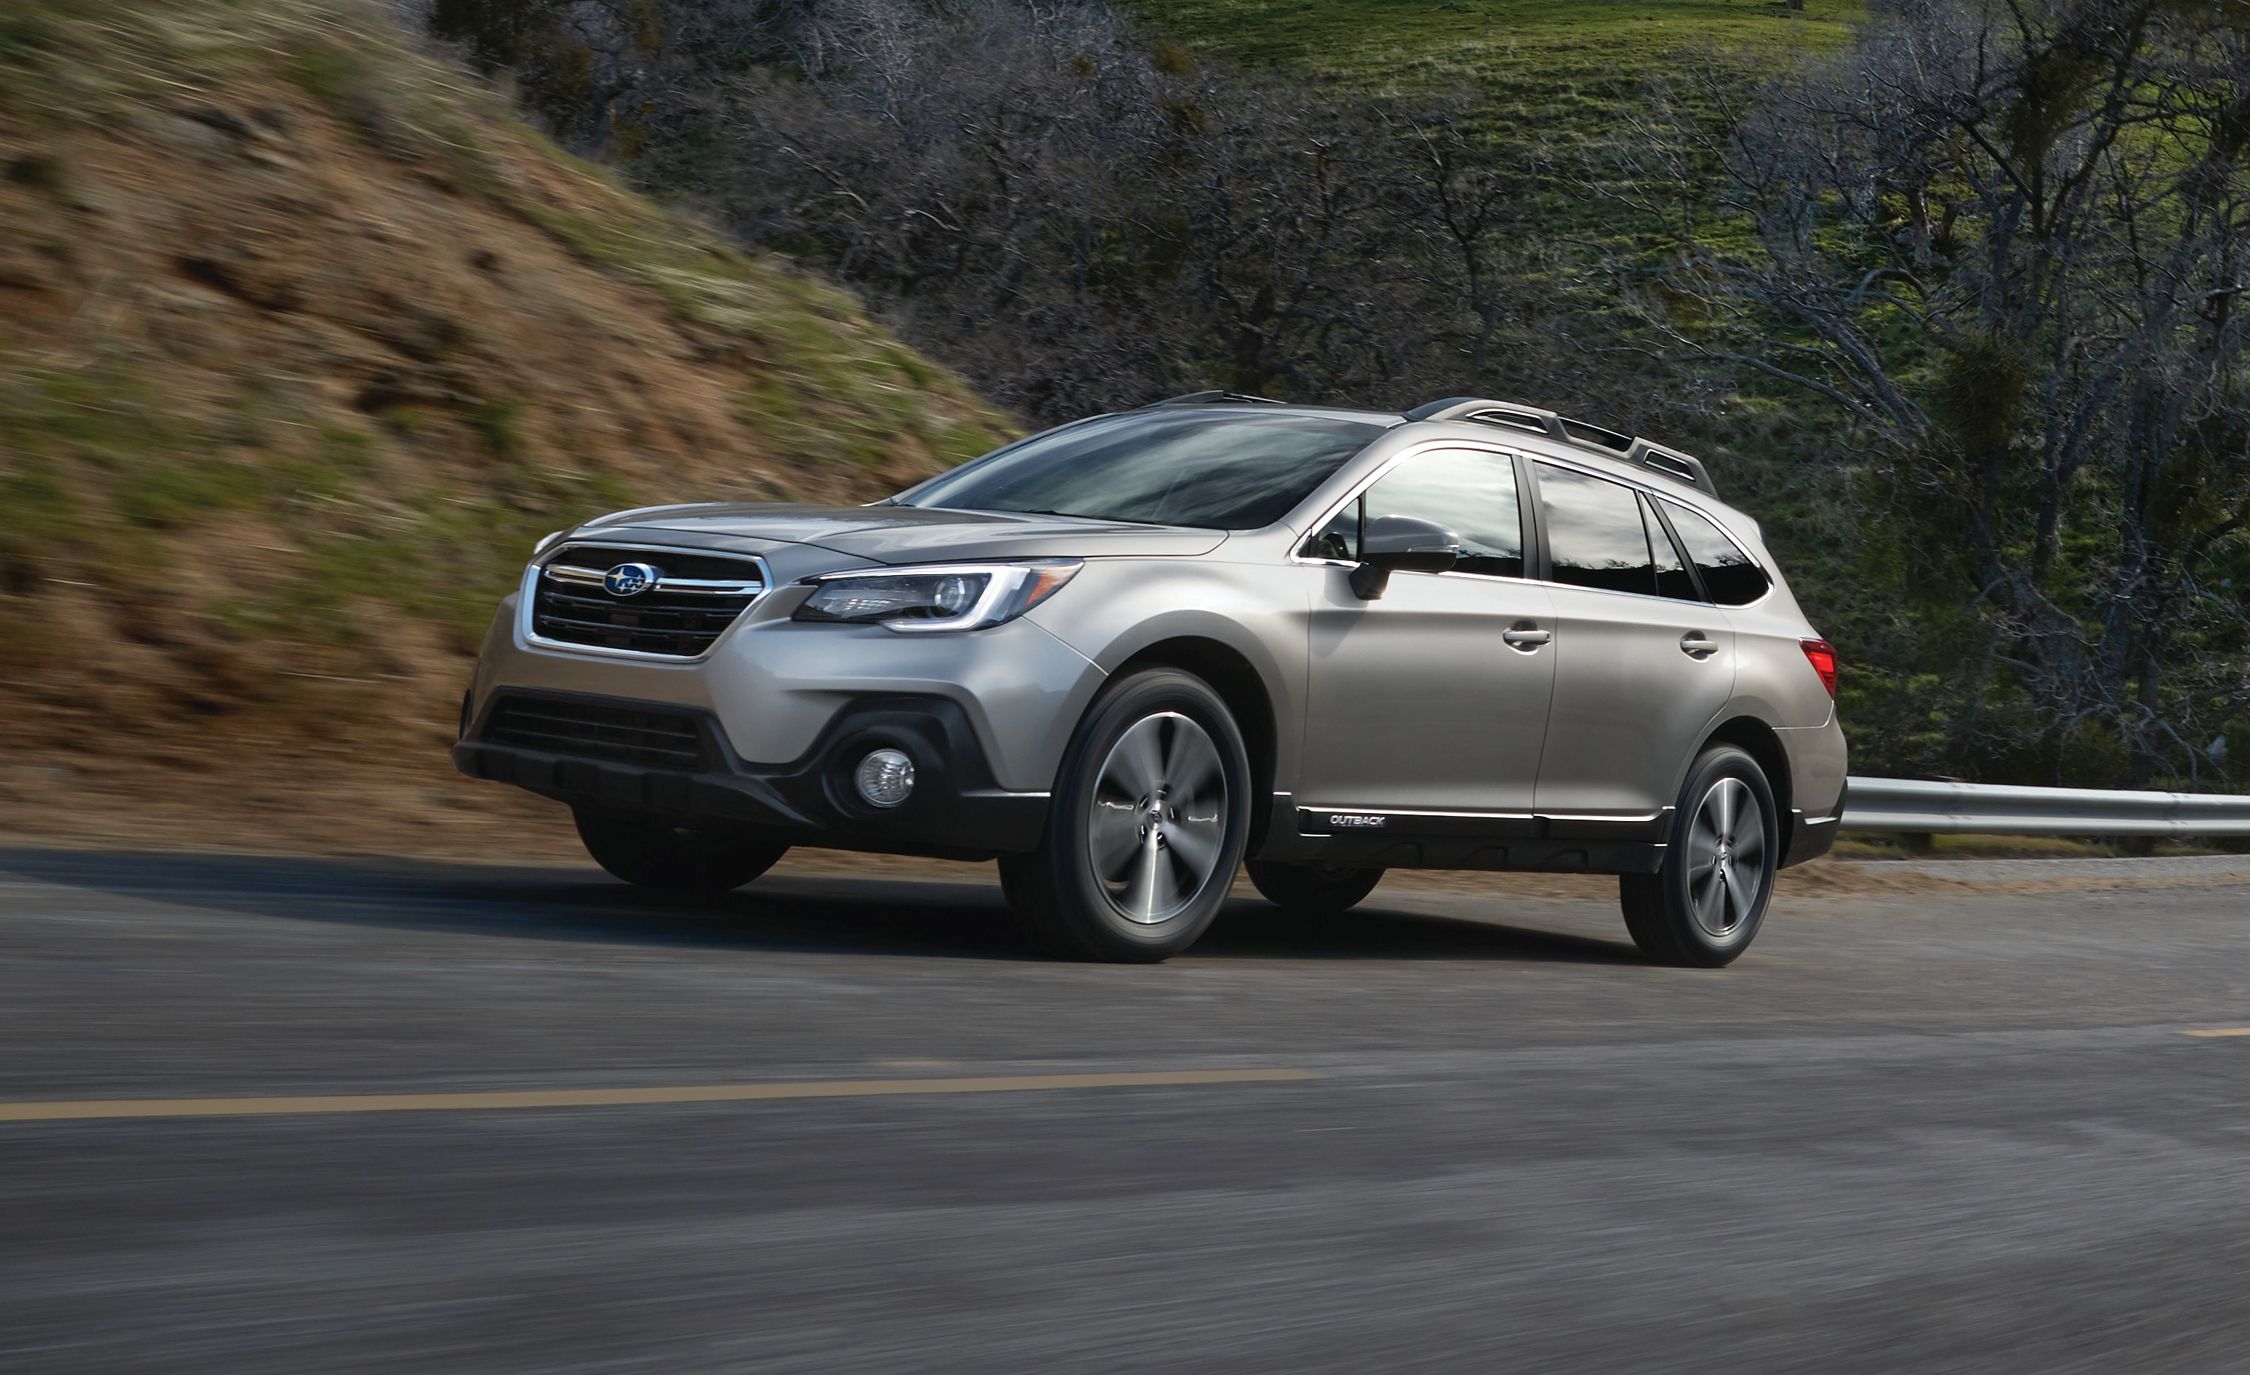 2018 Subaru Outback Review, Pricing, and Specs